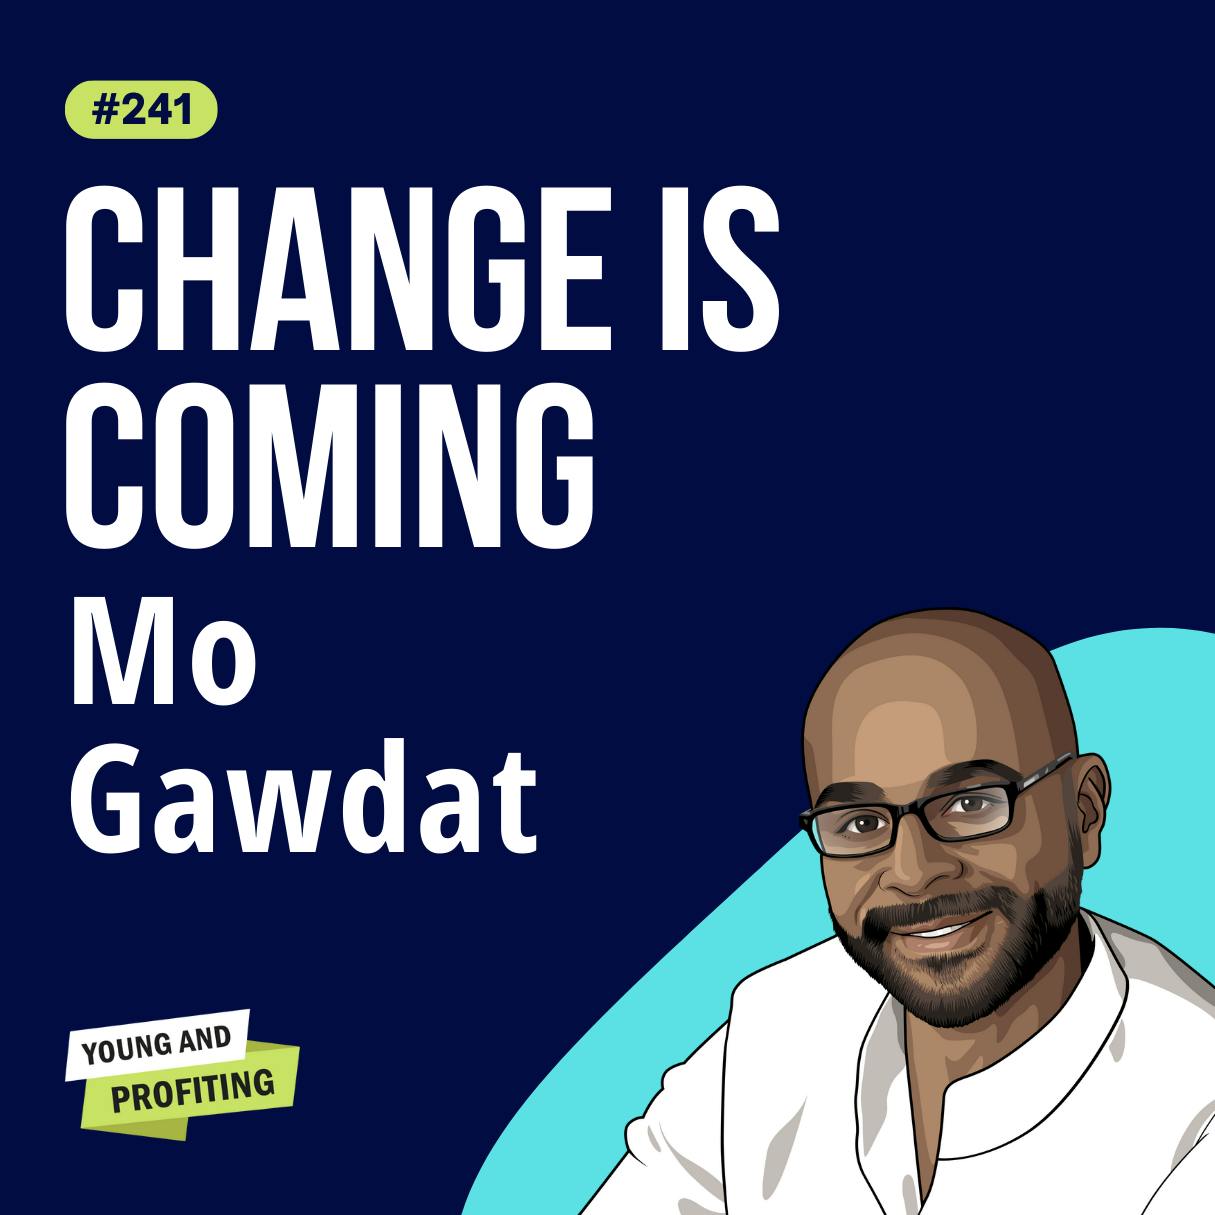 Mo Gawdat: Ex-Google Officer Warns About the Dangers of AI, Urges All to Prepare Now! | E241